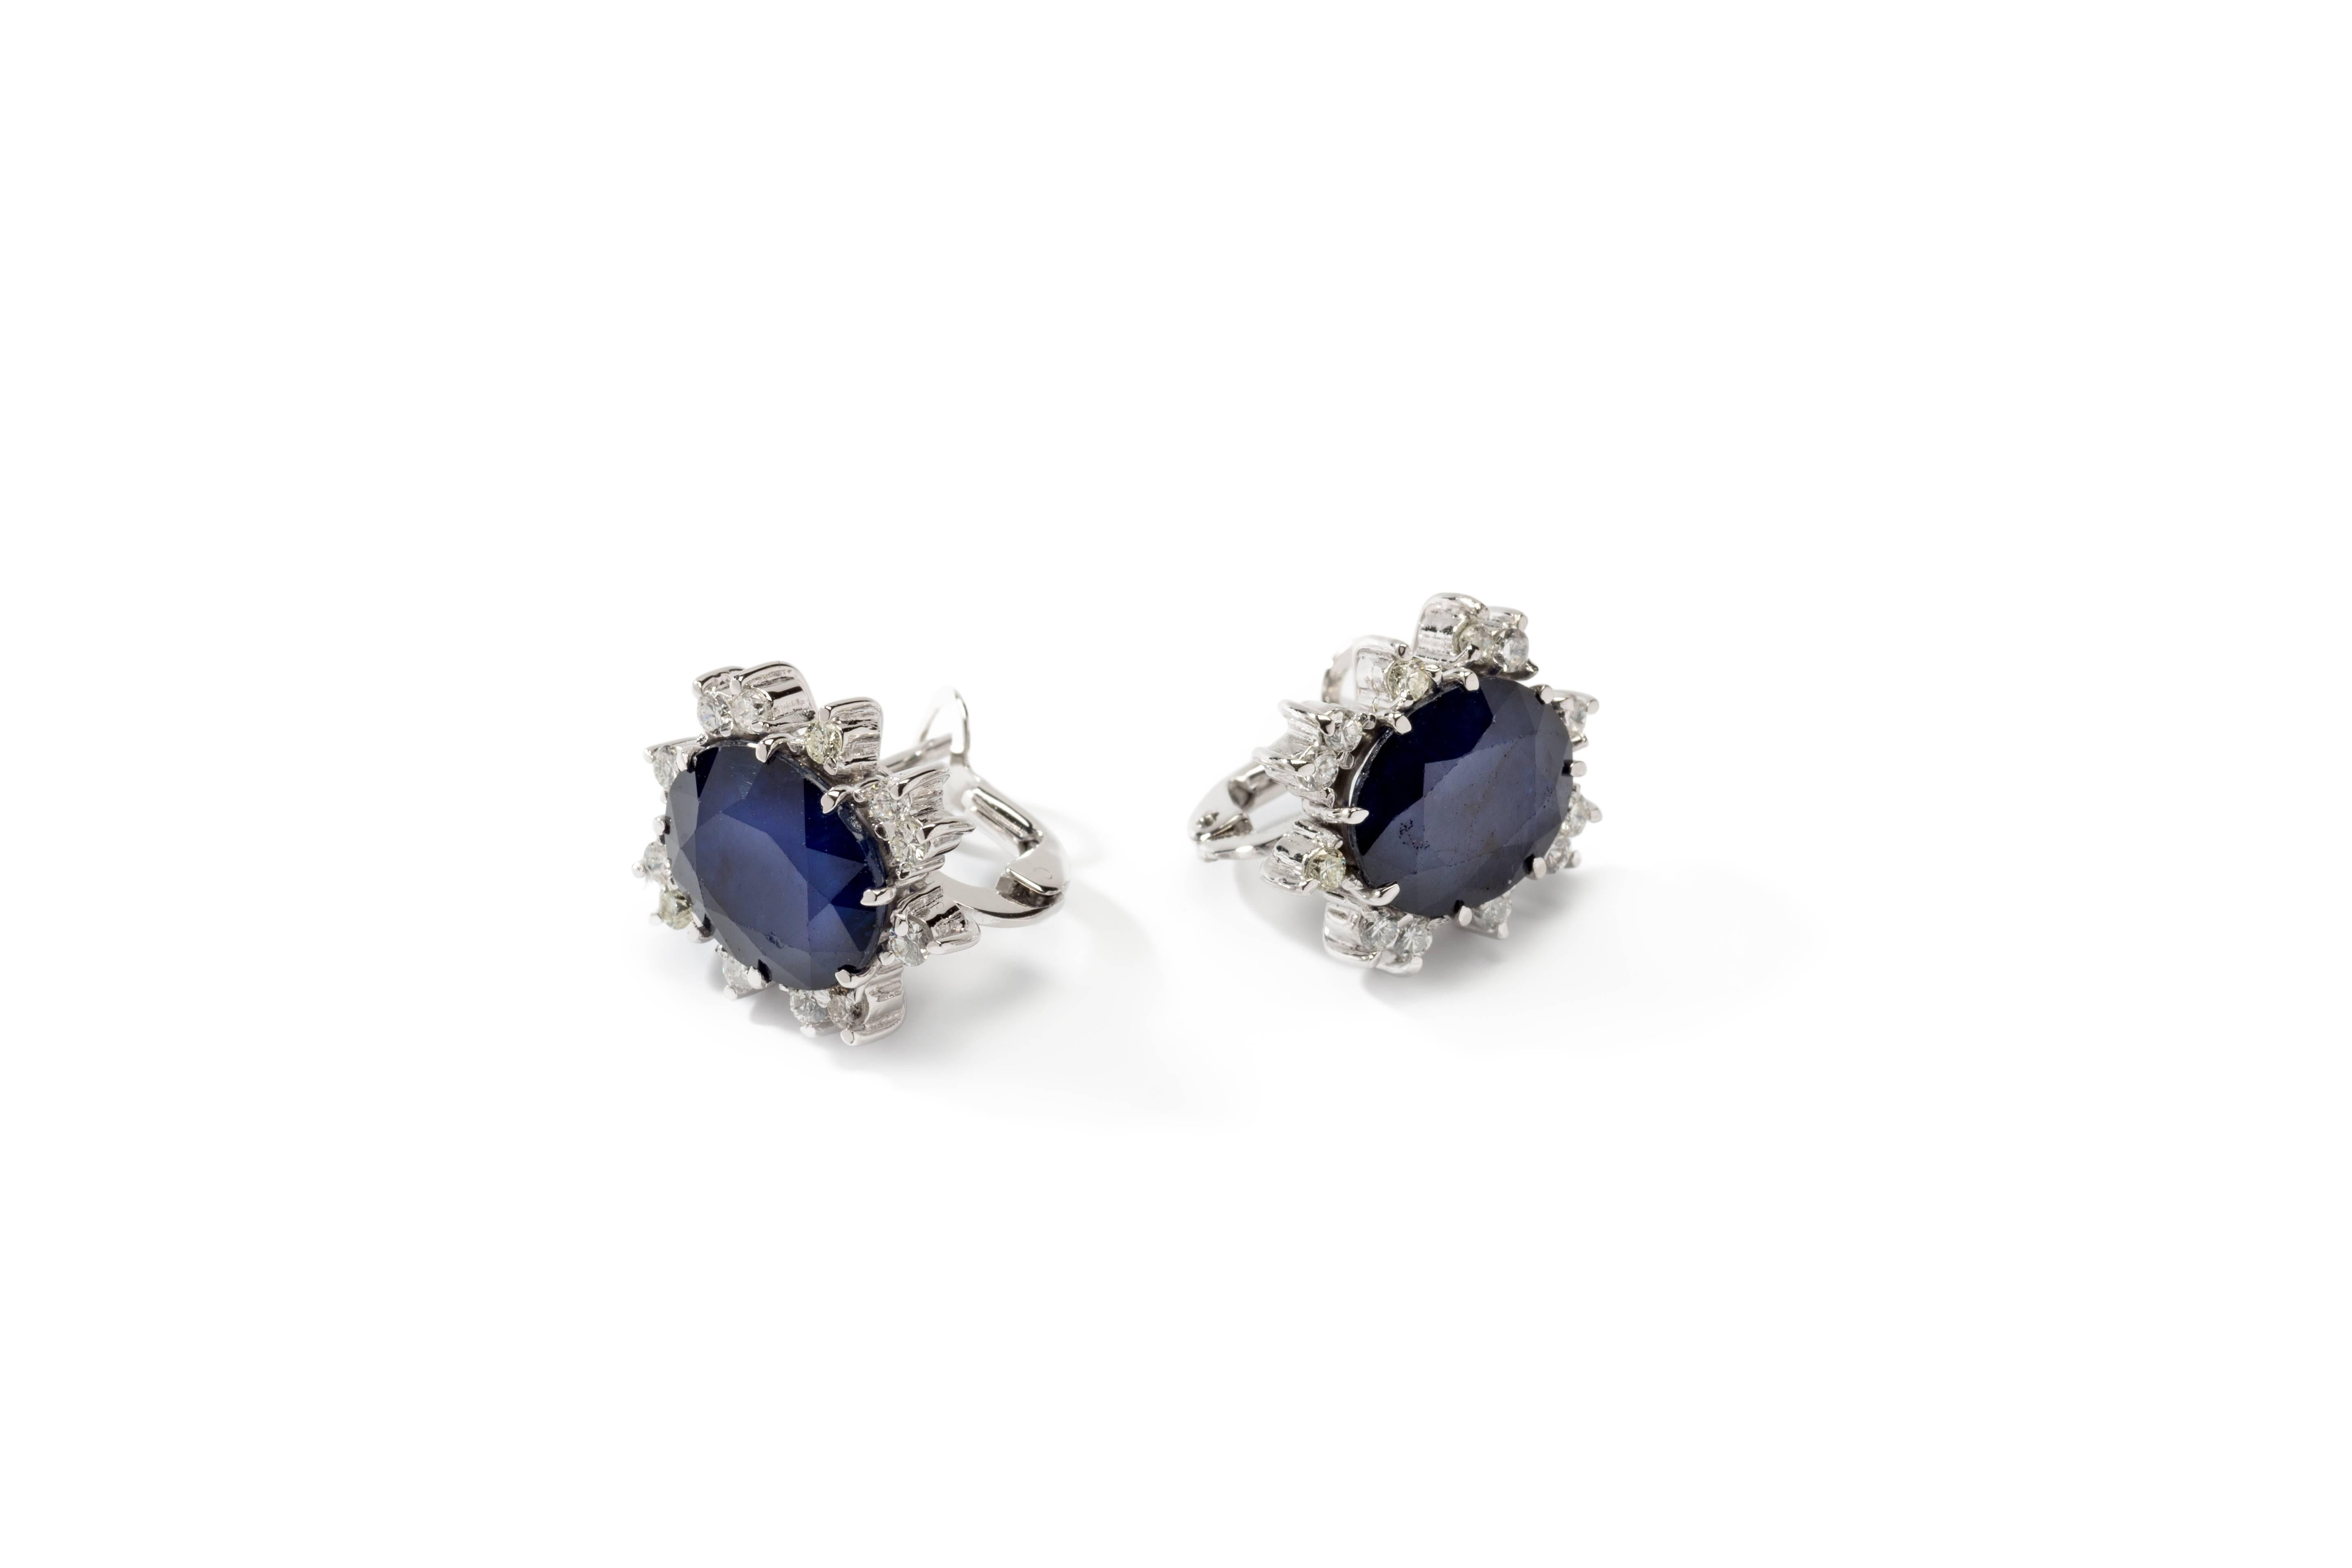 Set with two Australian blue sapphires surrounded by 24 brilliant-cut diamonds weighing circa 0,68 ct. Mounted in 18K white gold. Marked with the purity 750. Total weight: 7,4 grams. Measurements: 0.67 x 0.59 in ( 1,7 x 1,5 cm )

